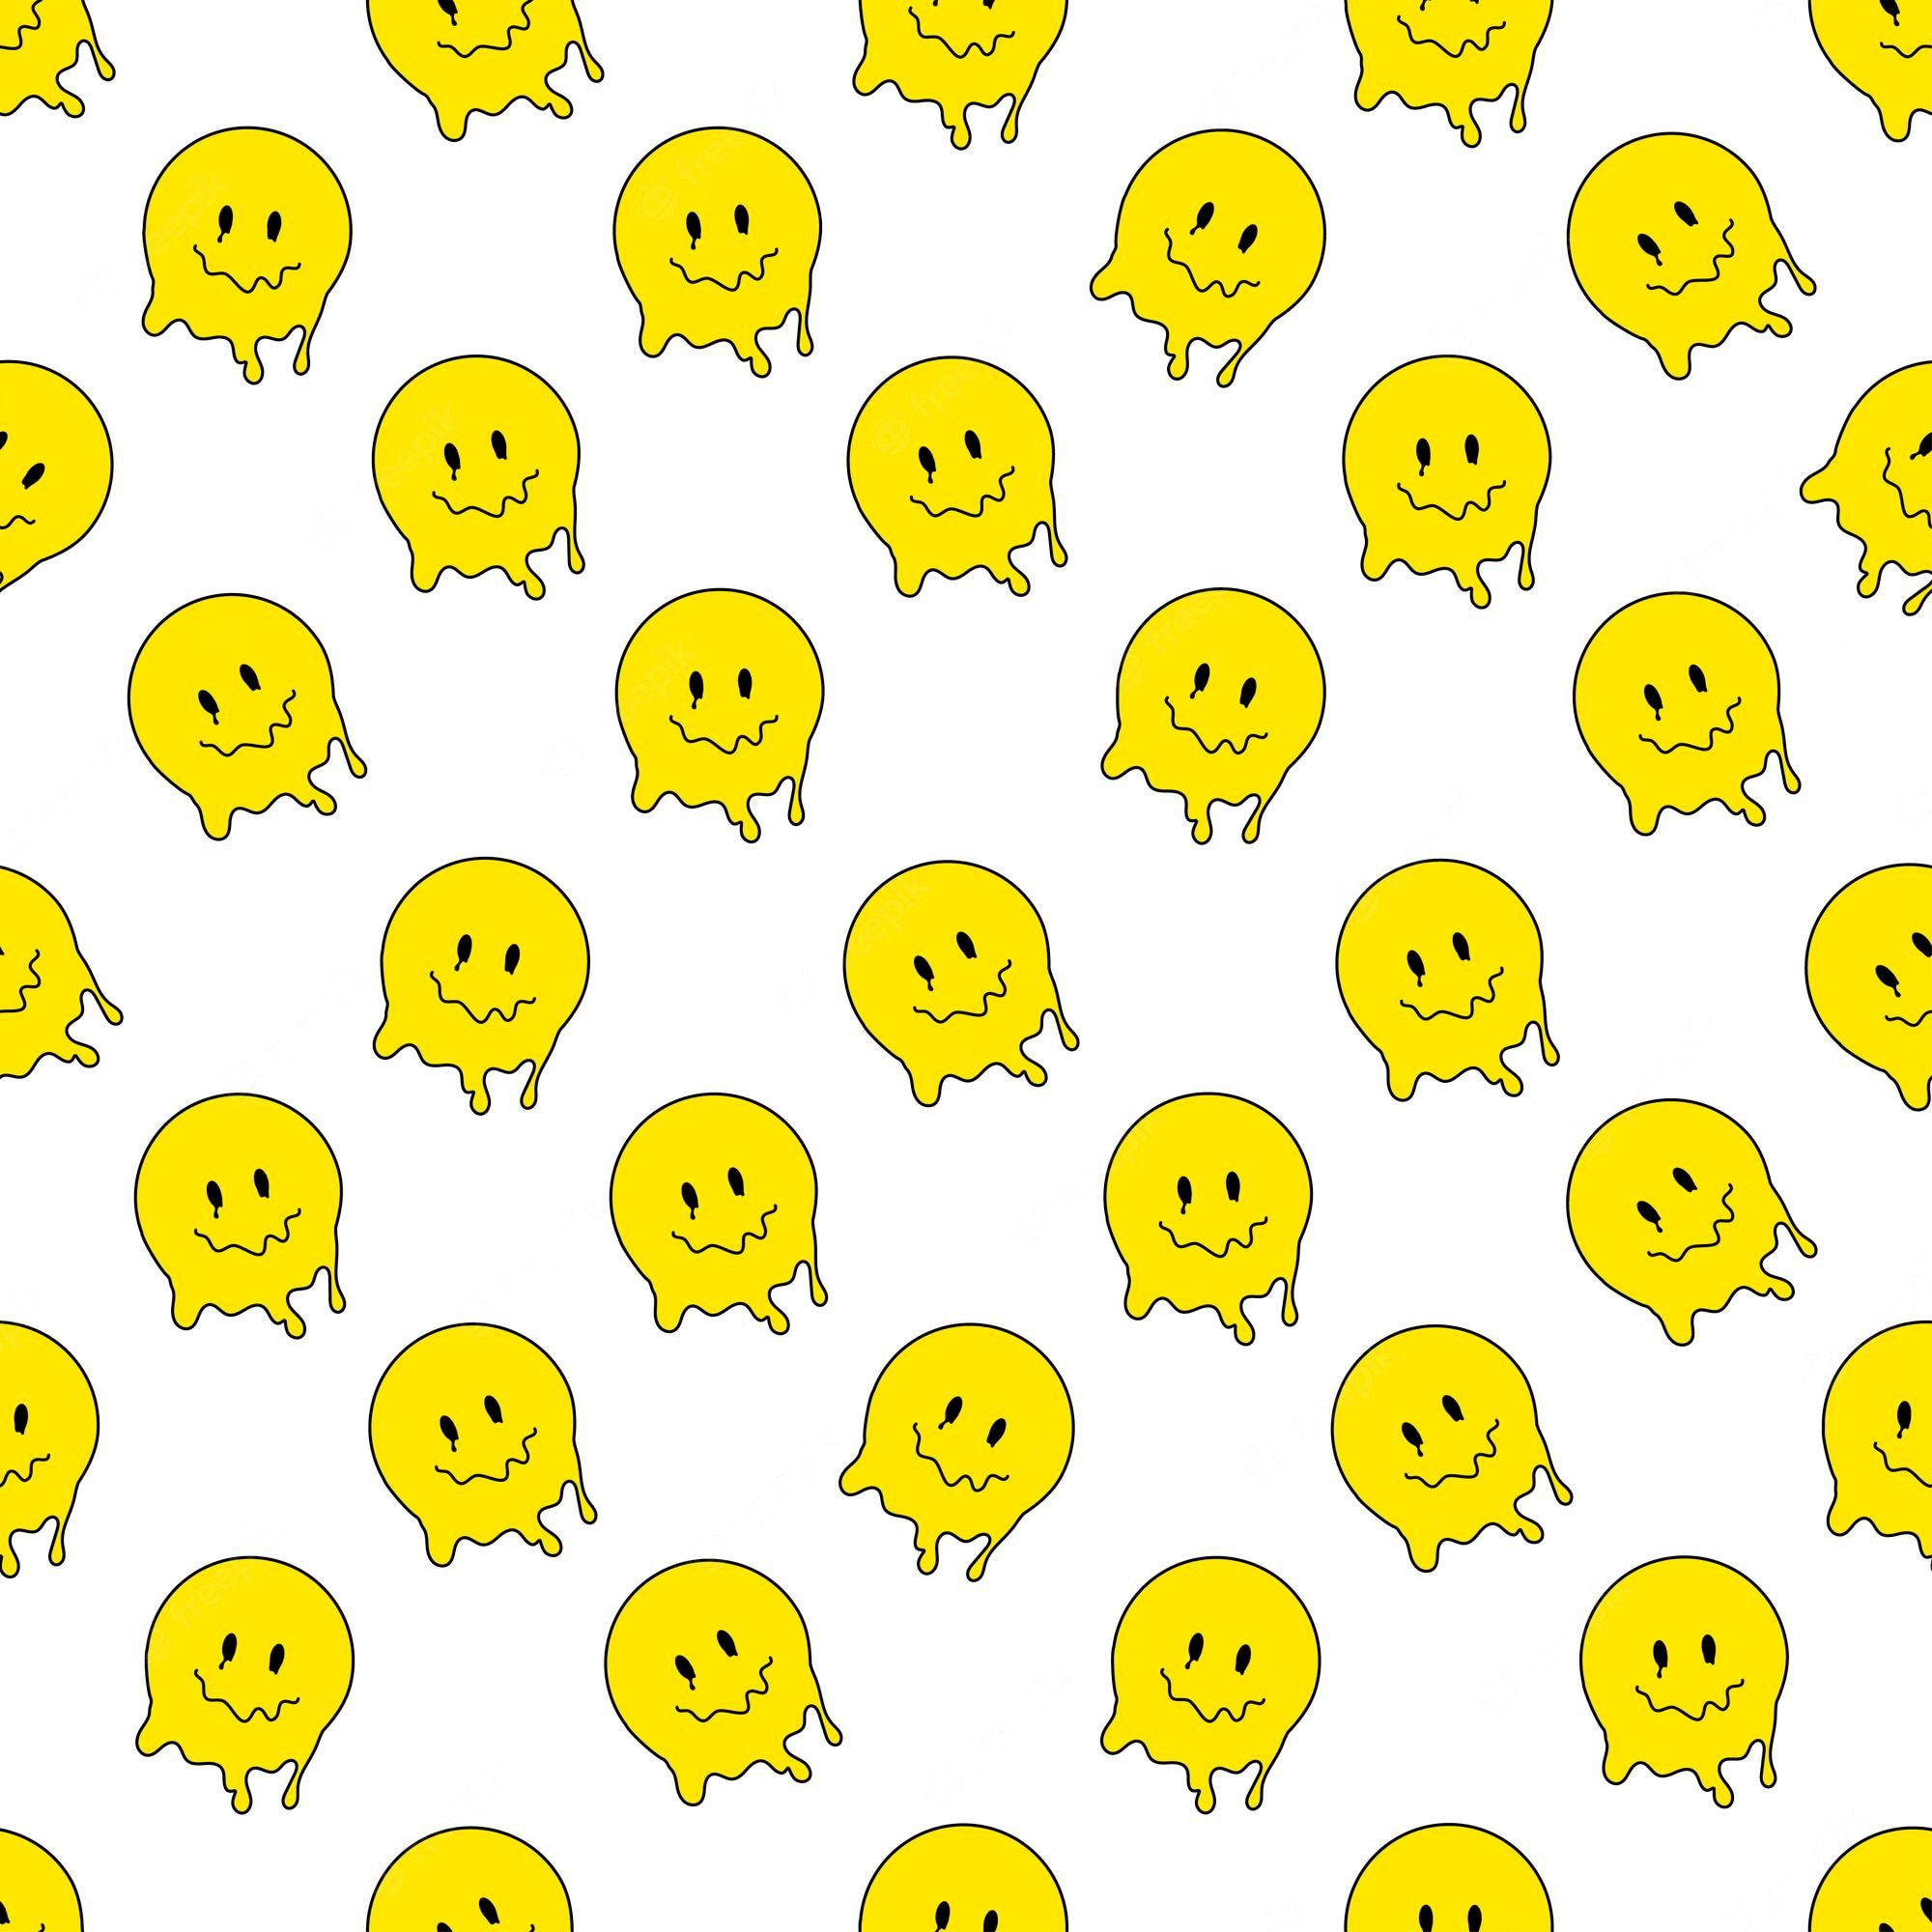 A pattern of melting smiley faces on a white background - Smile